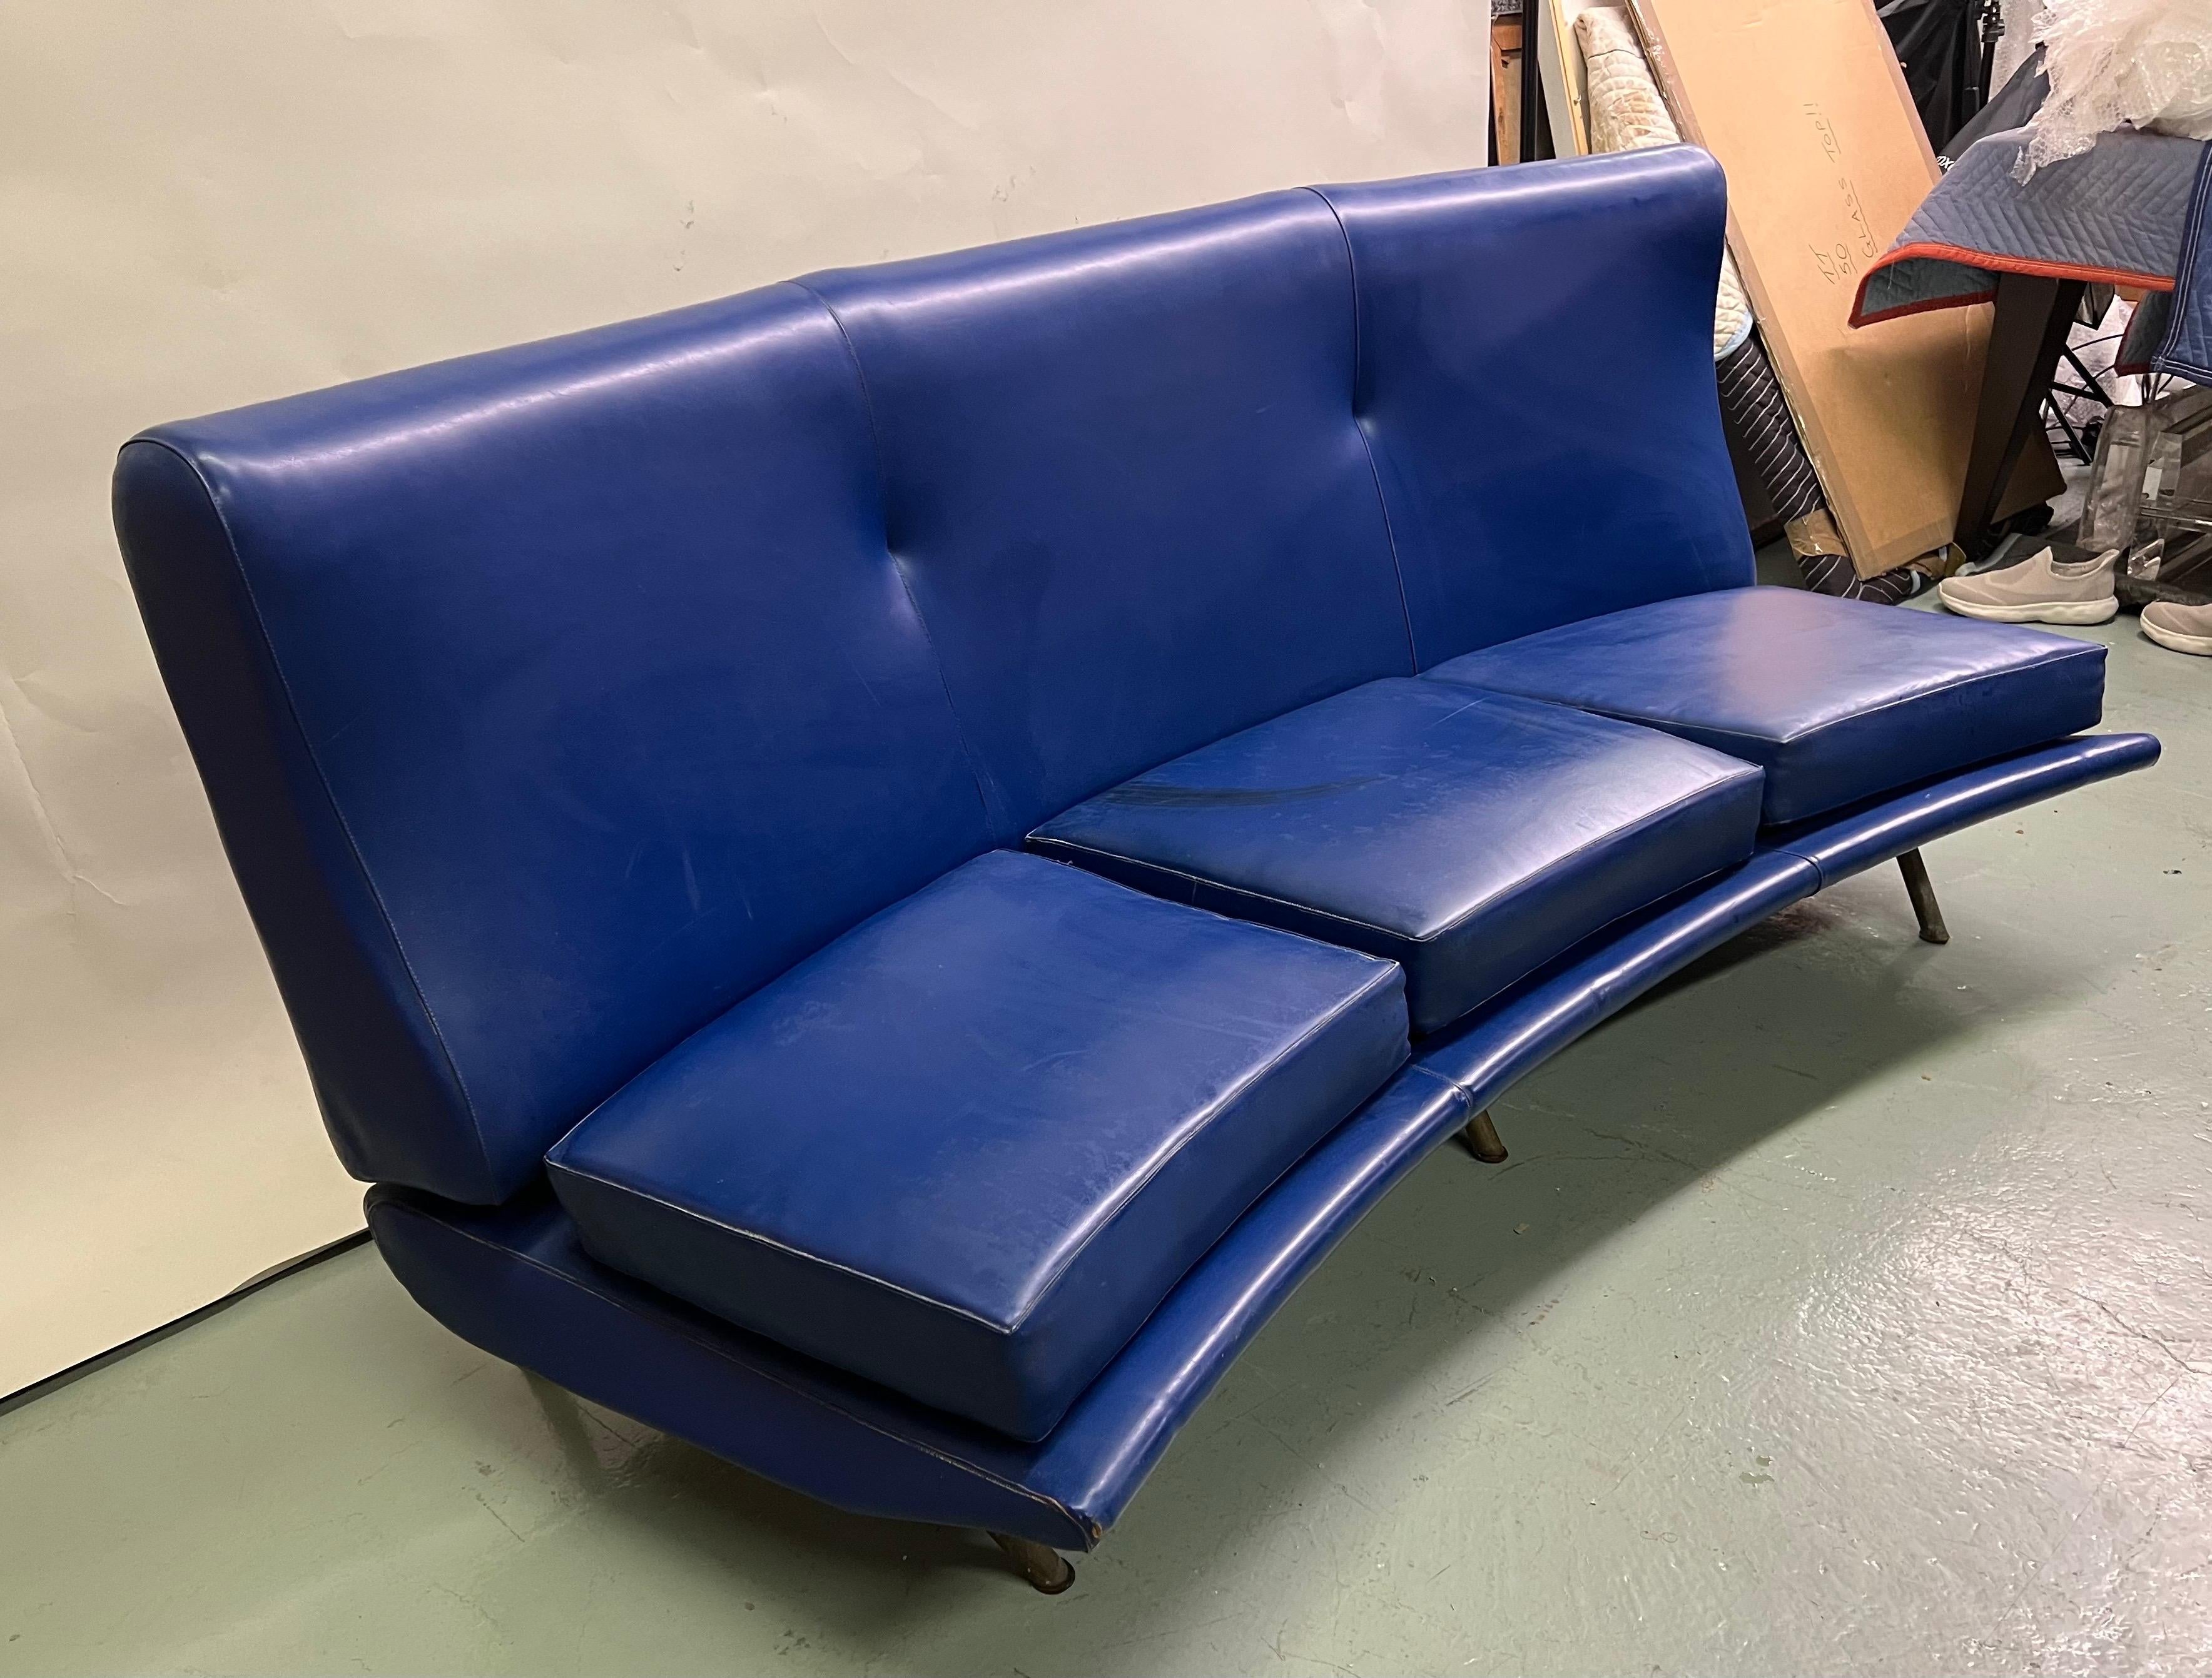 A Rare and Important Italian Mid-Century Modern Triennale Sofa / Divan/ Couch by Marco Zanuso for Arflex, Italy, circa 1951. The piece is in it's original Ultra-marine faux leather / vinyl upholstery and Features a rare, subtle, curved form and